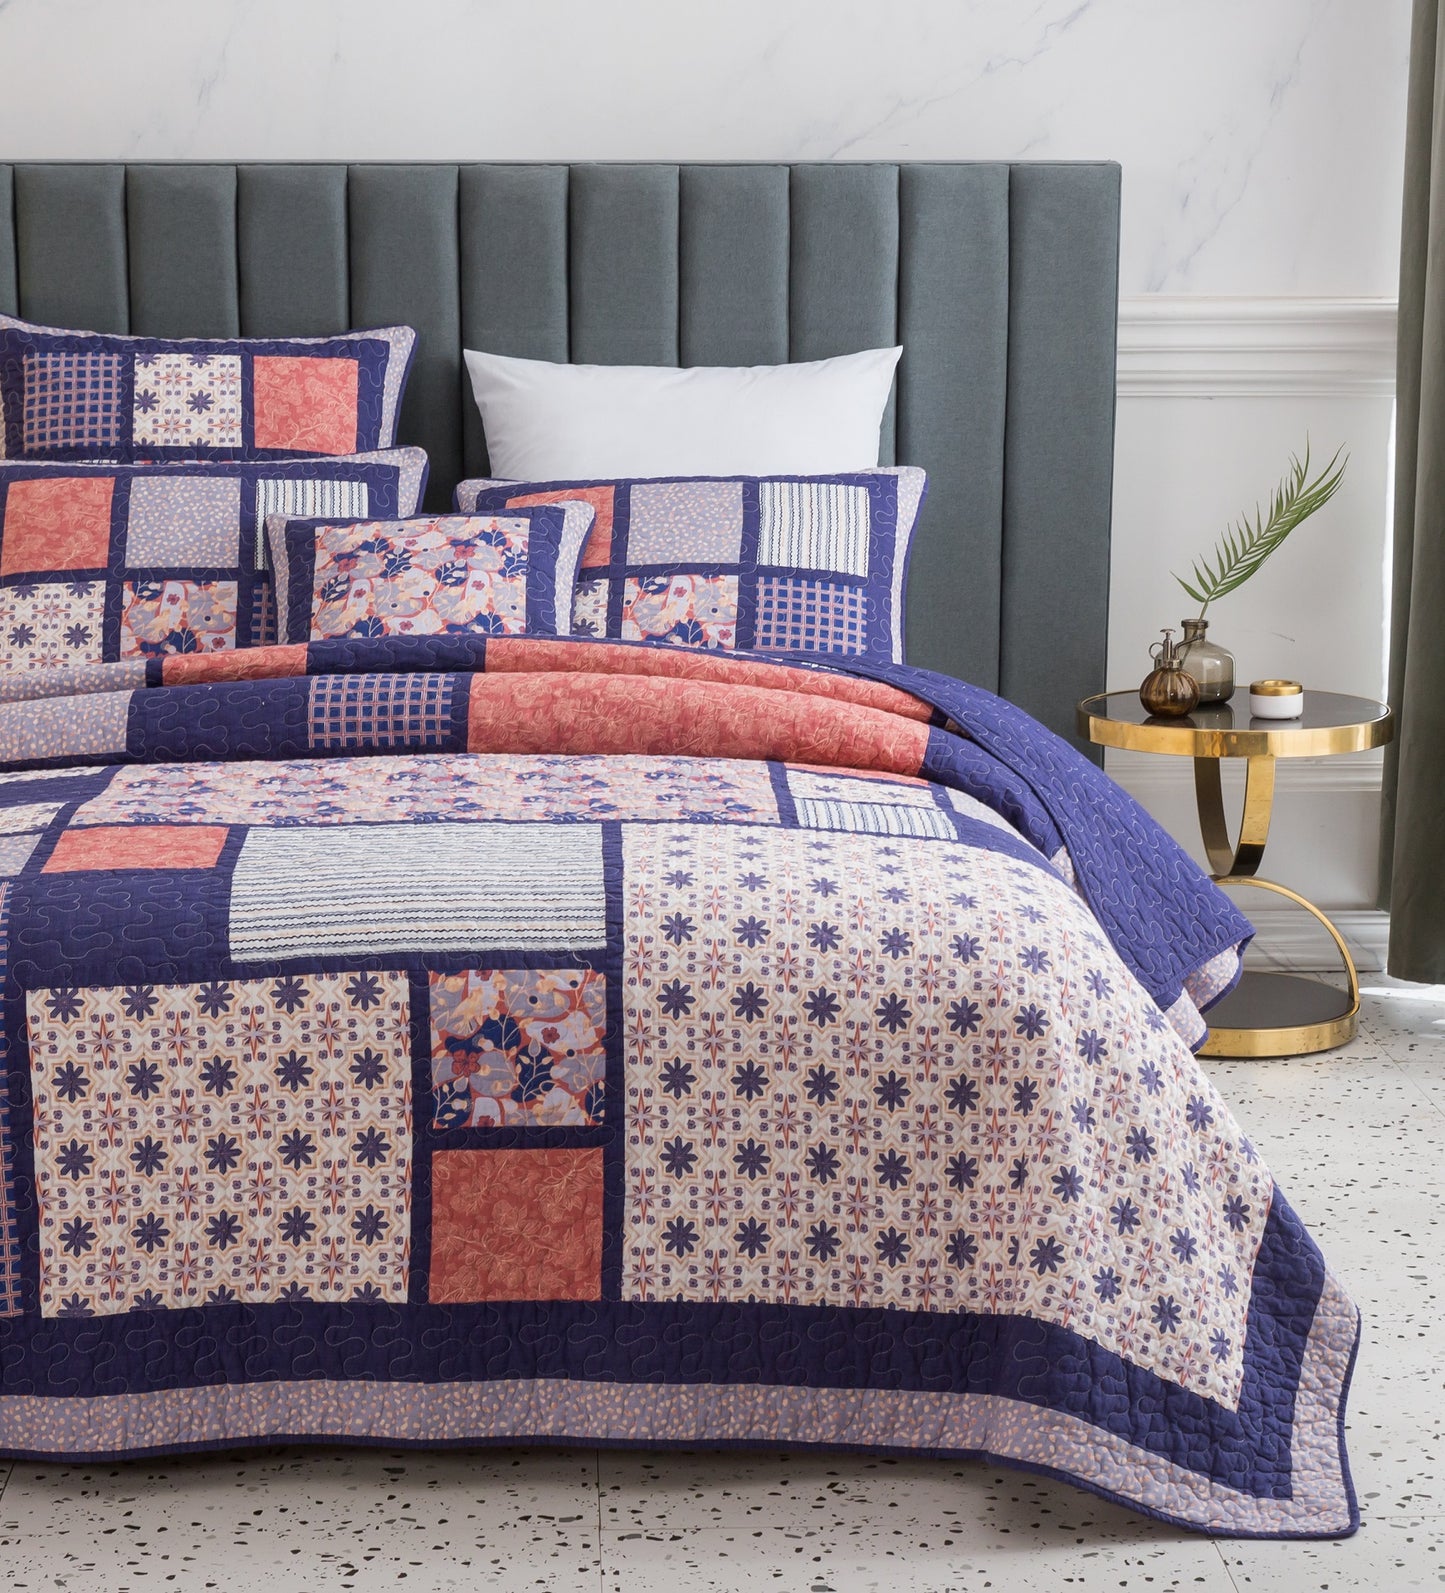 Peachy Blossoms Plum Purple Floral Patchwork Quilted Bedspread Set - Designed in USA (JHW877)